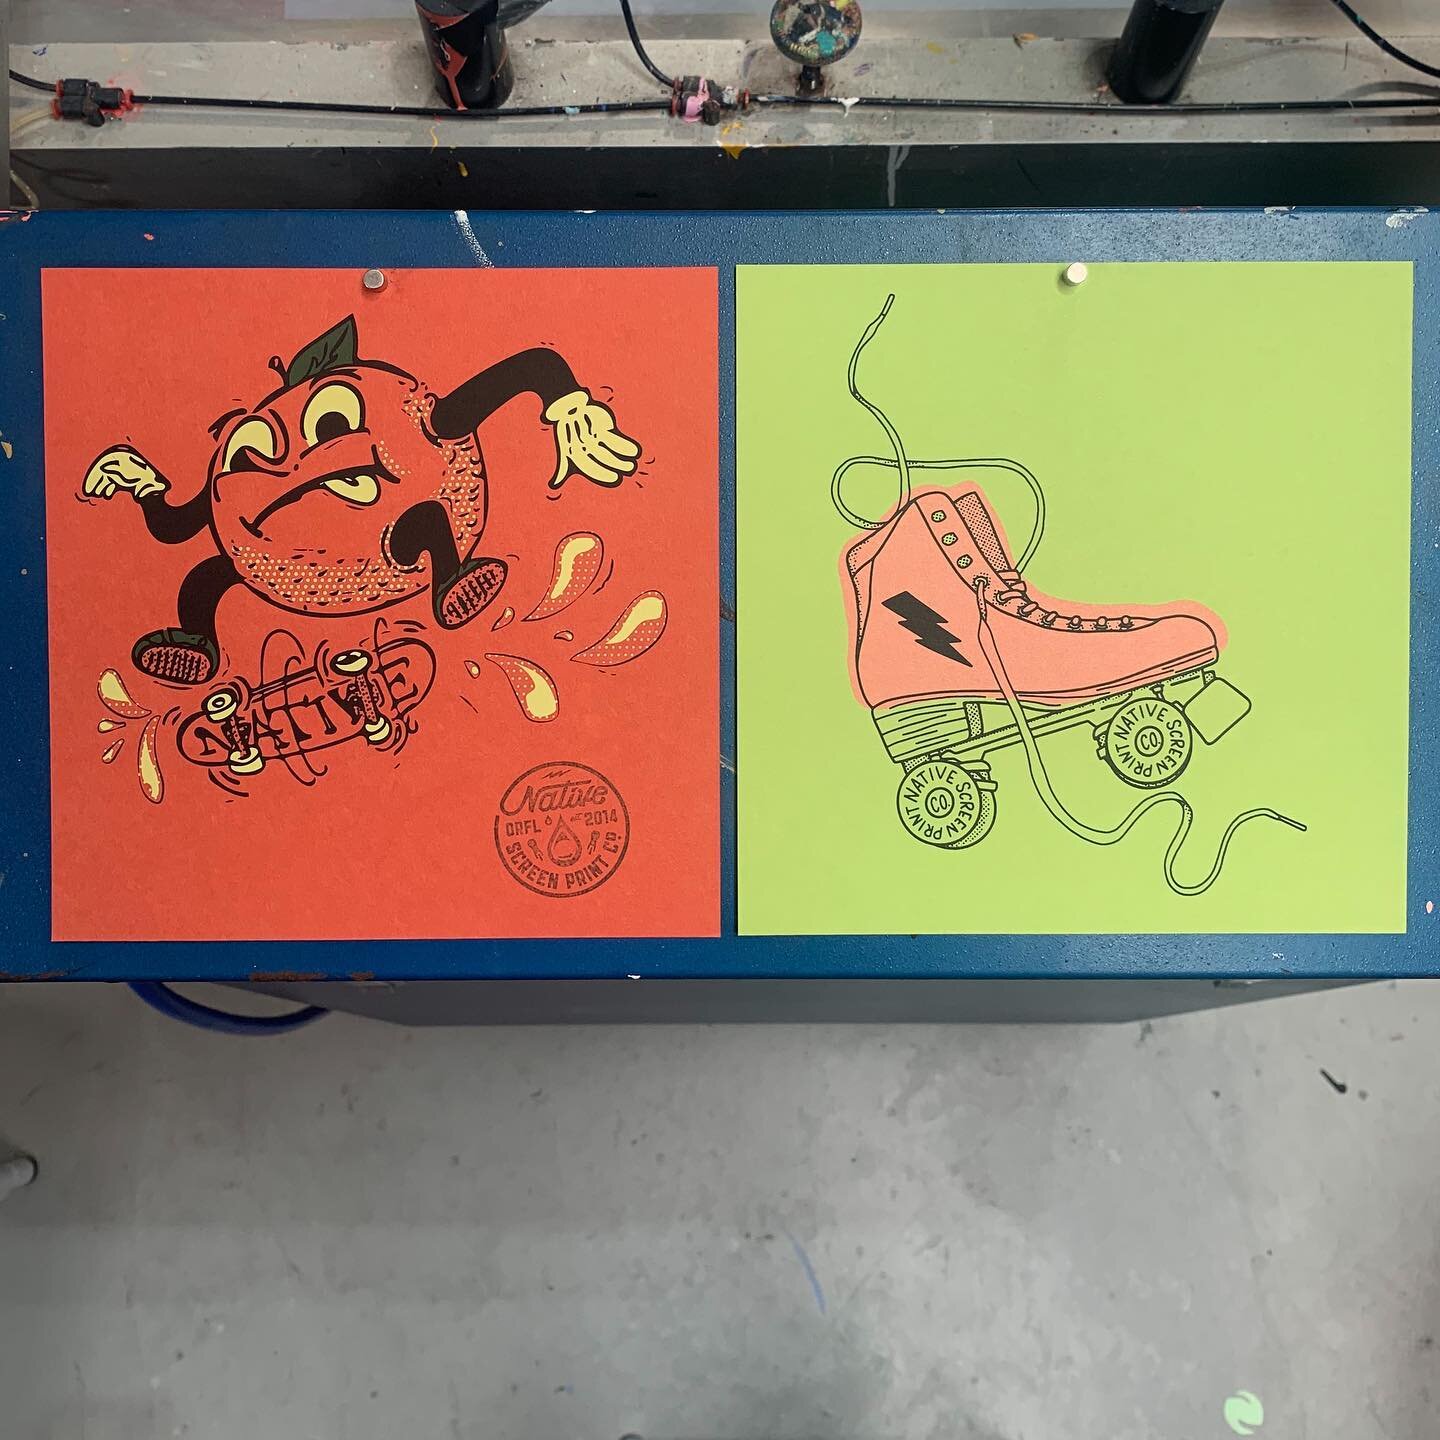 Skate &amp; Destroy!

Orange designed by @ha_chle &amp; roller skate designed by @katie_kicksass!
Printed on @frenchpaperco Orange Fizz and Limeade.
&bull;
&bull;
&bull;
&bull;
&bull;
#nativescreenprintco #screenprint #printmakers #graphicdesign #art